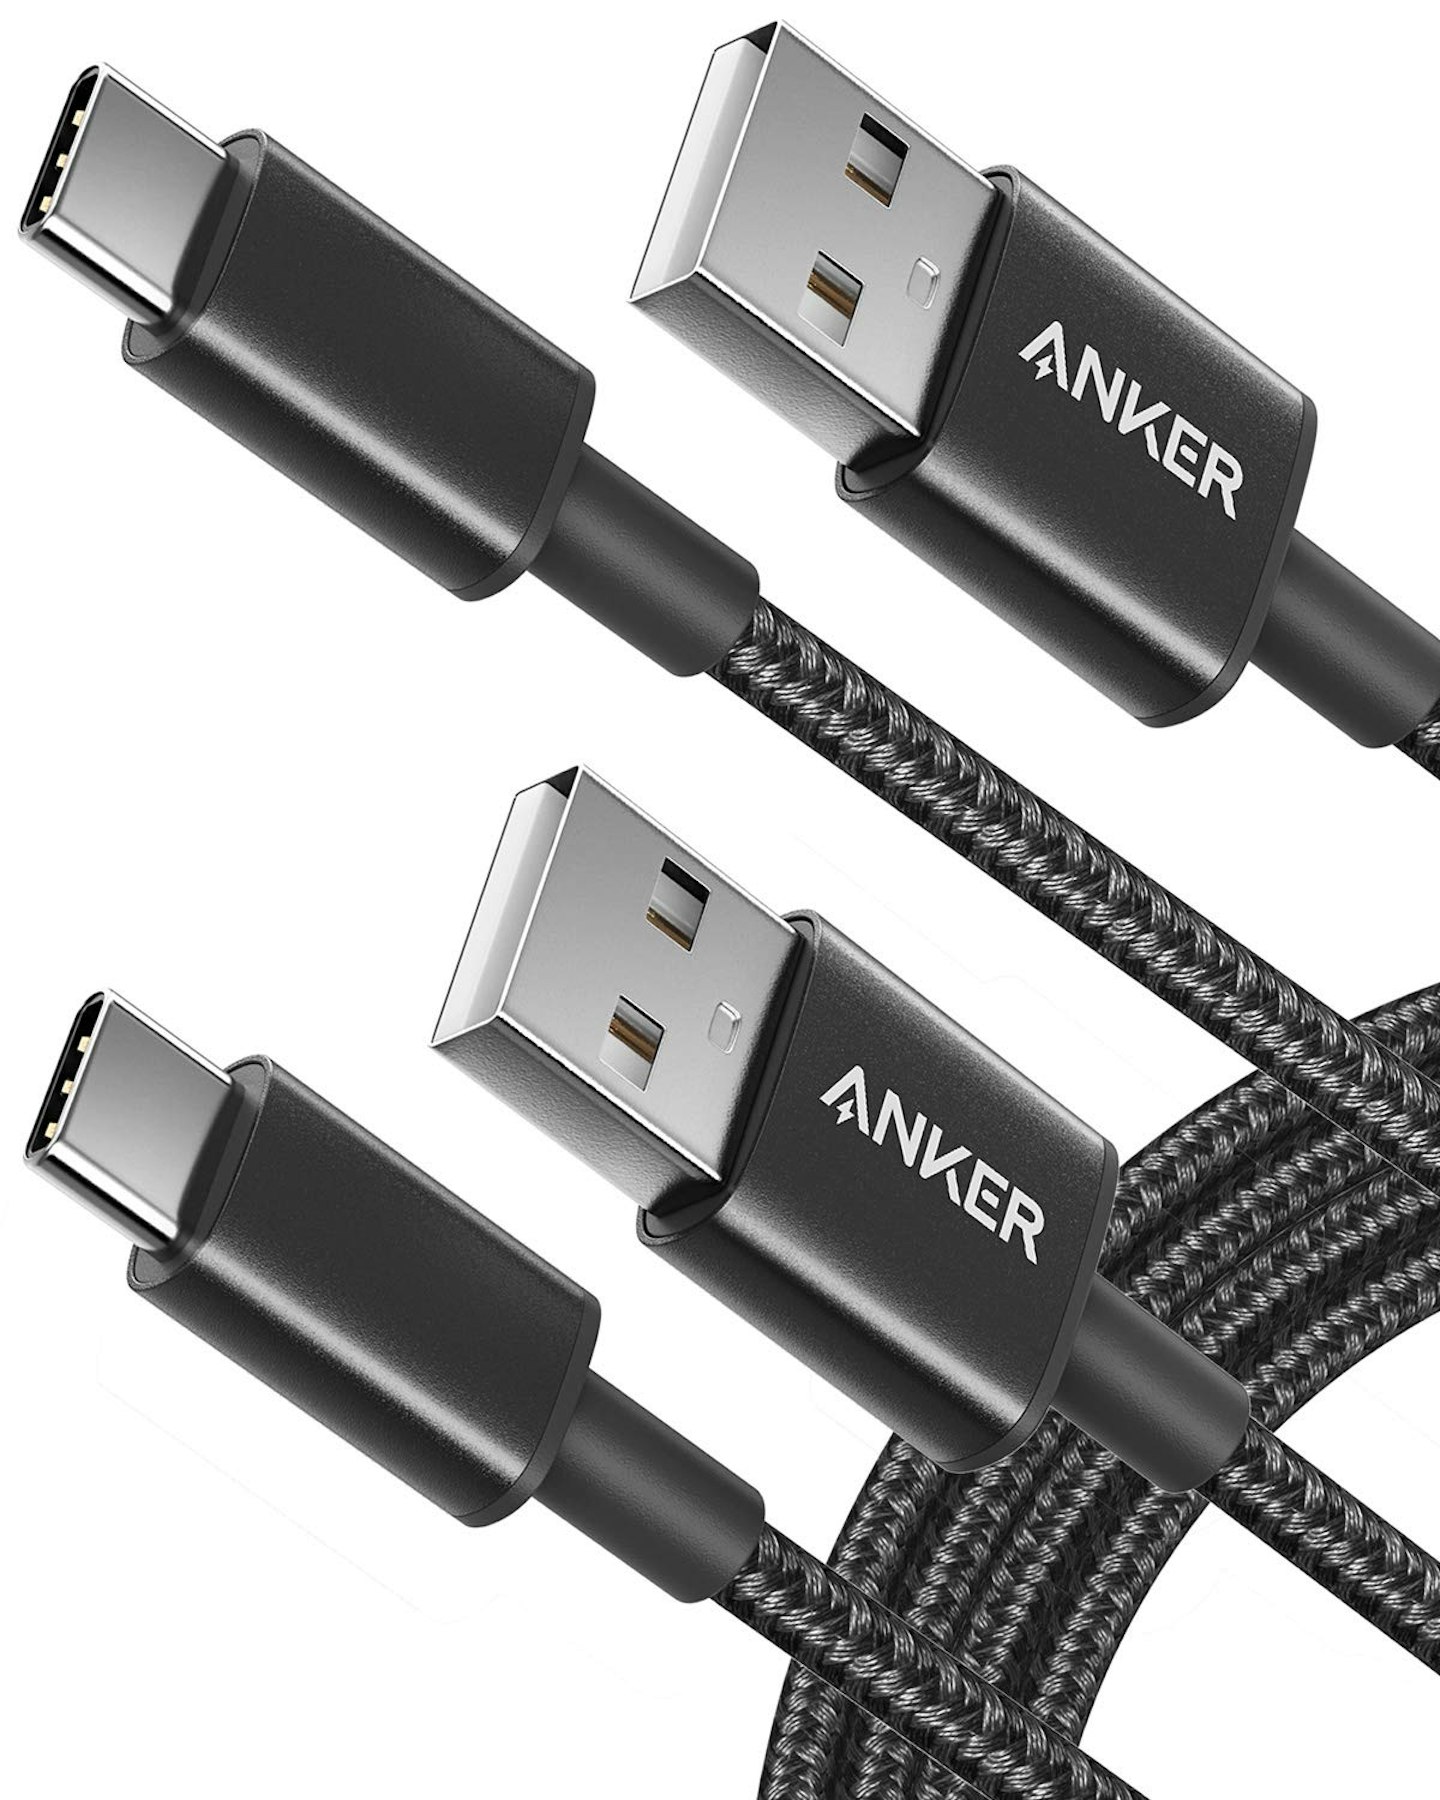 Anker USB-A to USB-C Charger Cable (6ft) - 2 Pack